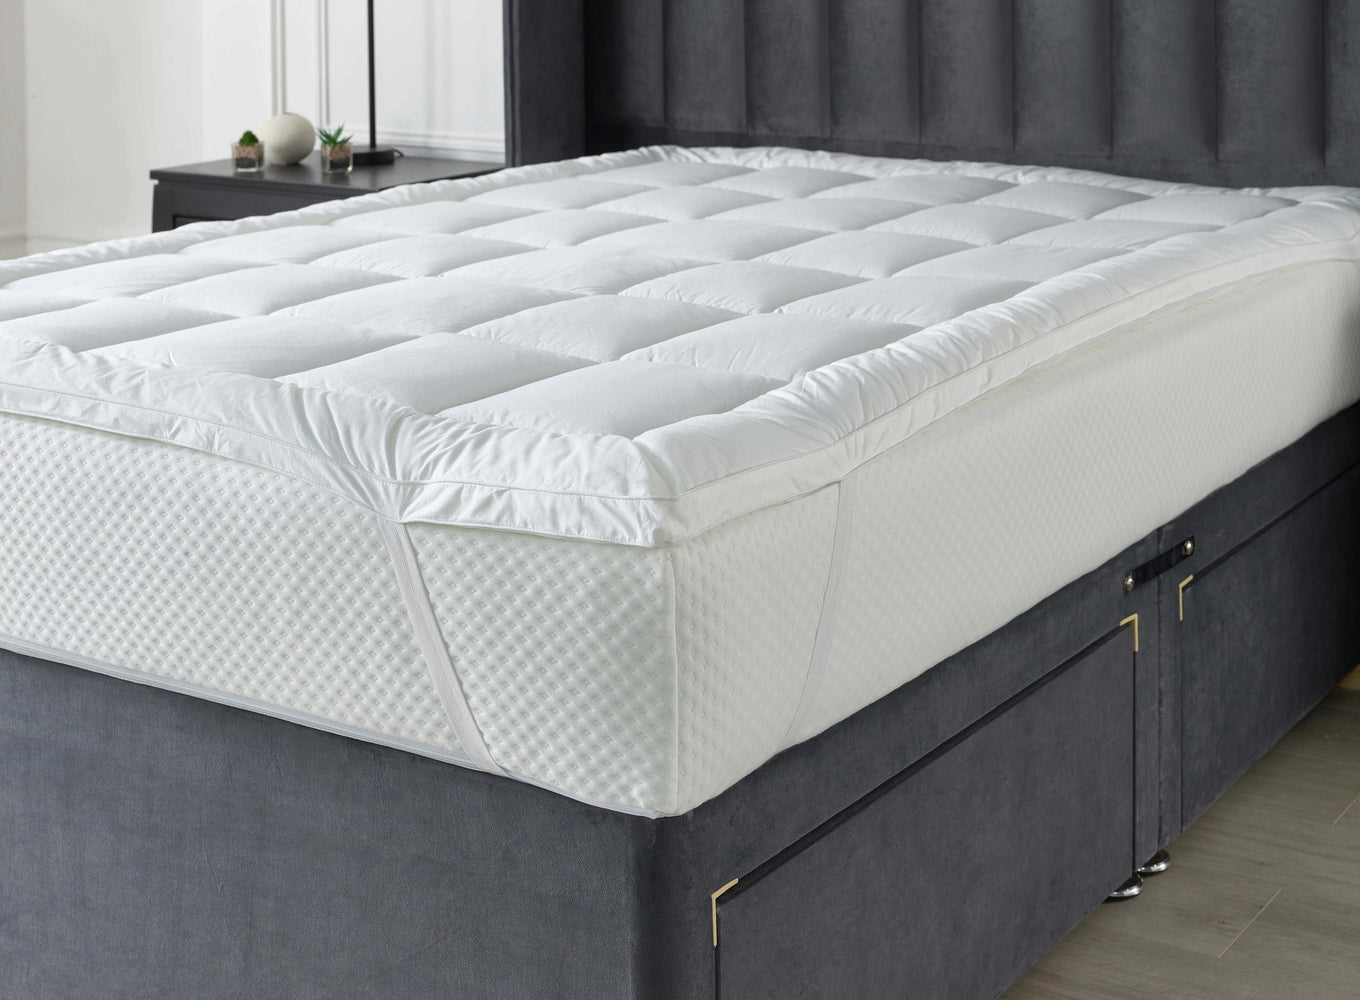 downland downie ball mattress topper small double